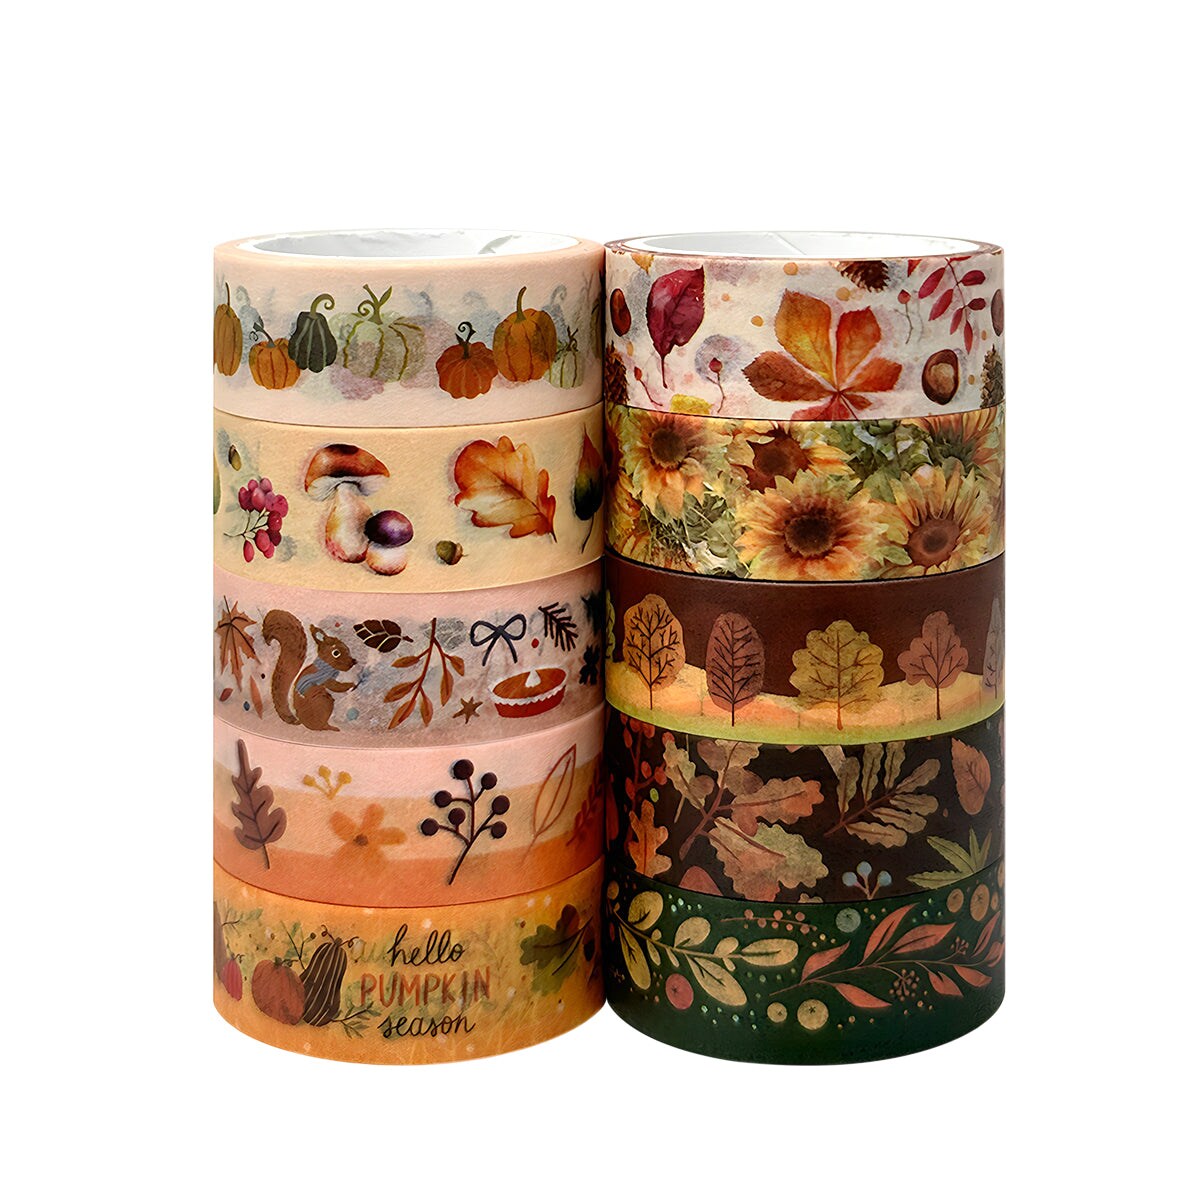 Wrapables Decorative Washi Tape for Scrapbooking, Stationery, Diary, Card Making (10 Rolls), Autumn Day